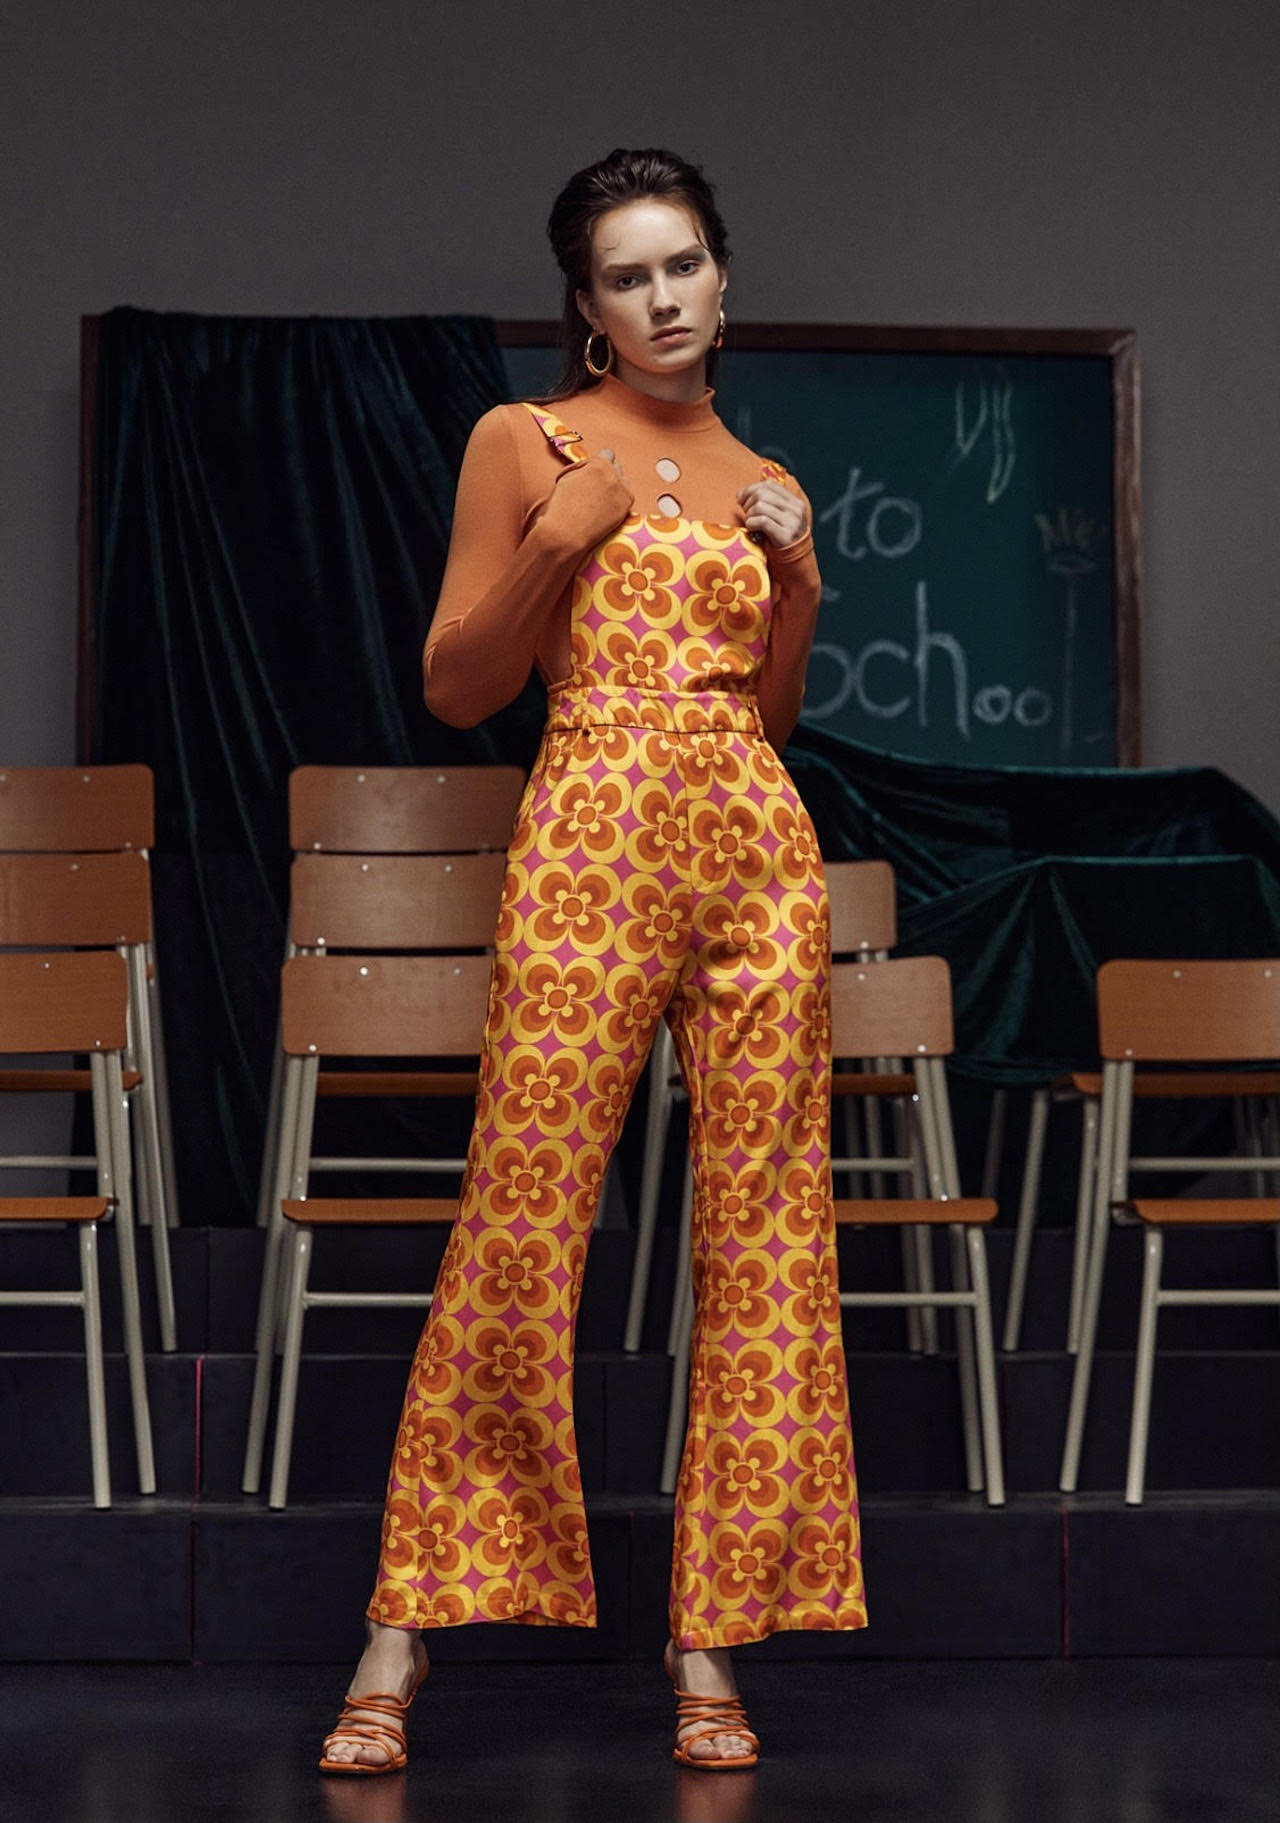 A model wears a graphic floral print jumpsuit with bellbottoms designed by FIDM Grad Simone Rogers